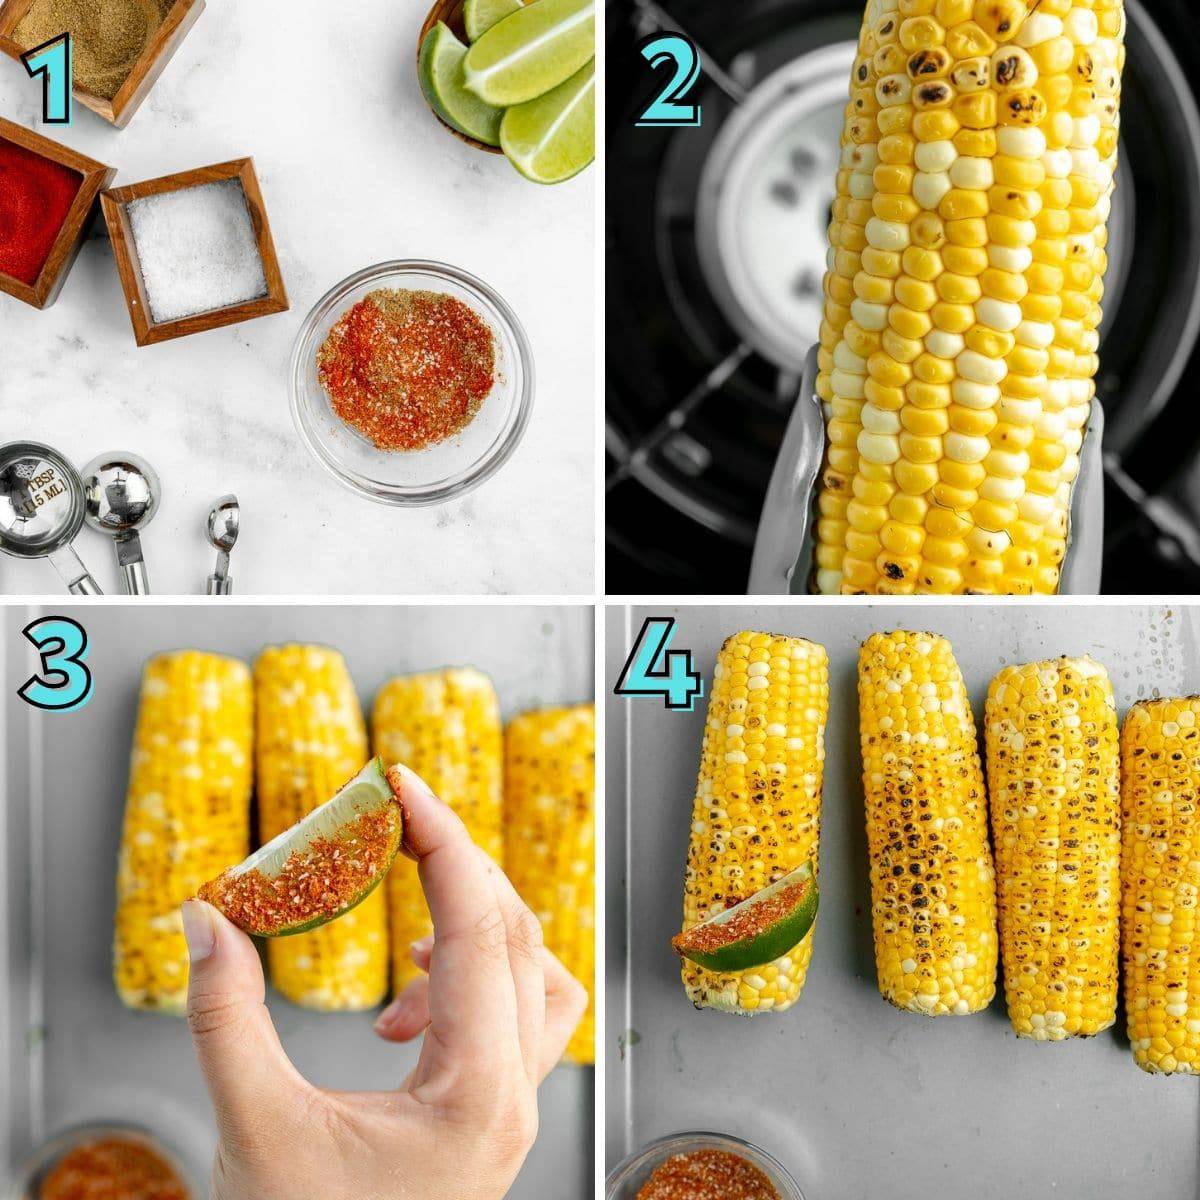 Step by step instructions to prepare indian street corn